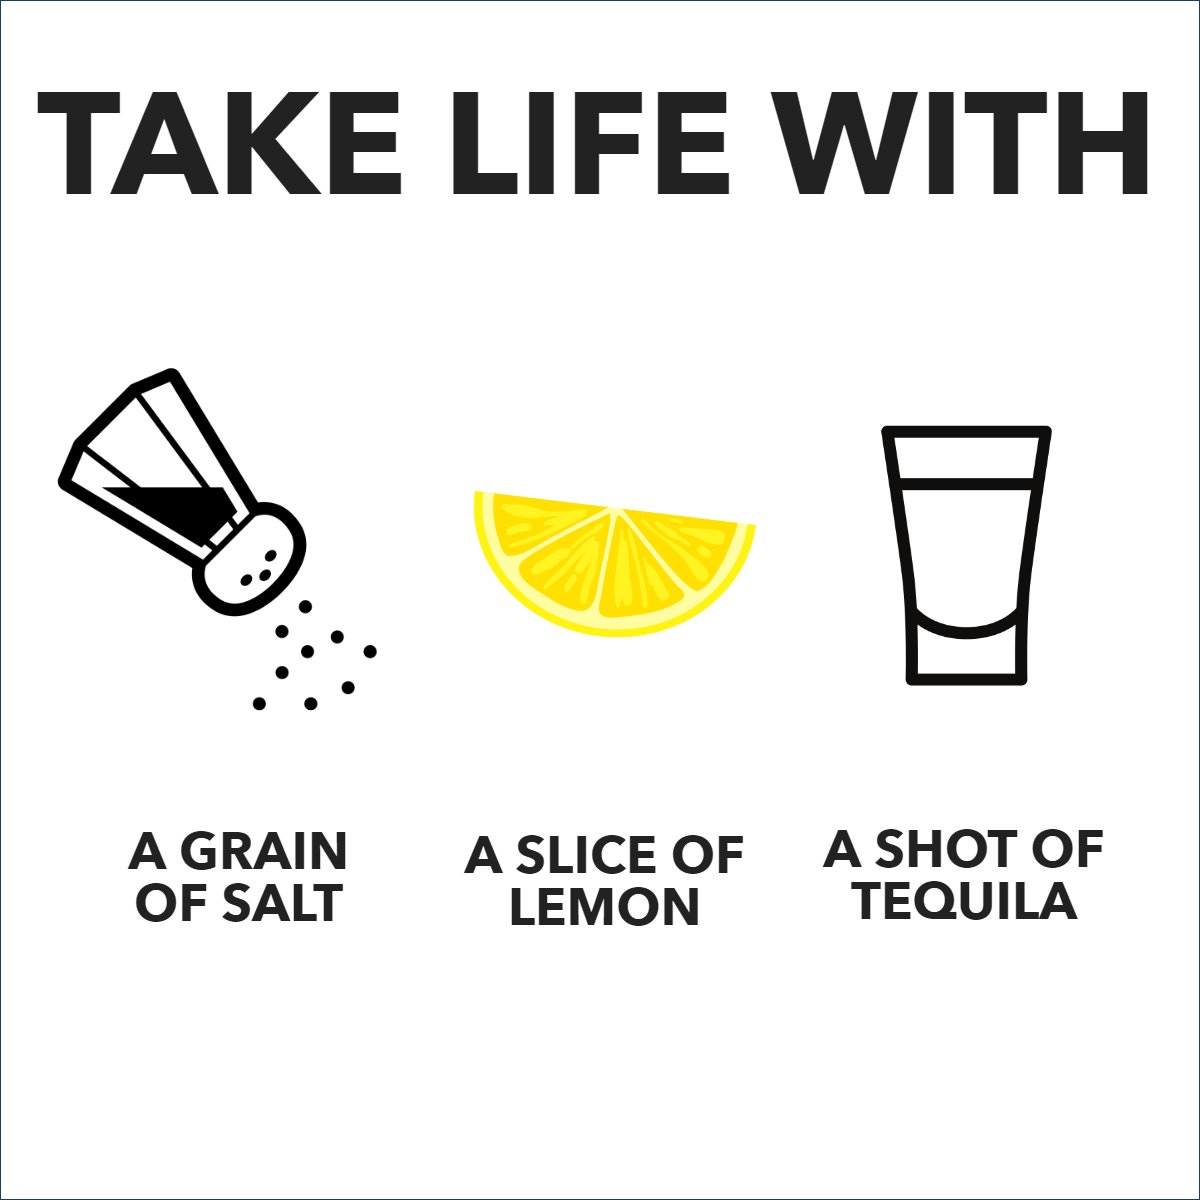 Take life with a grain of salt, a slice of lemon and a shot of tequila... 🧂🍋🥃

#lifeisbetteratthebeach    #tequilashots    #makelifebetter    #lemonslice    #tequilashot    #positive    #positivethinking
#lasvegasrealtor #lasvegasrealestate #sparrowsells